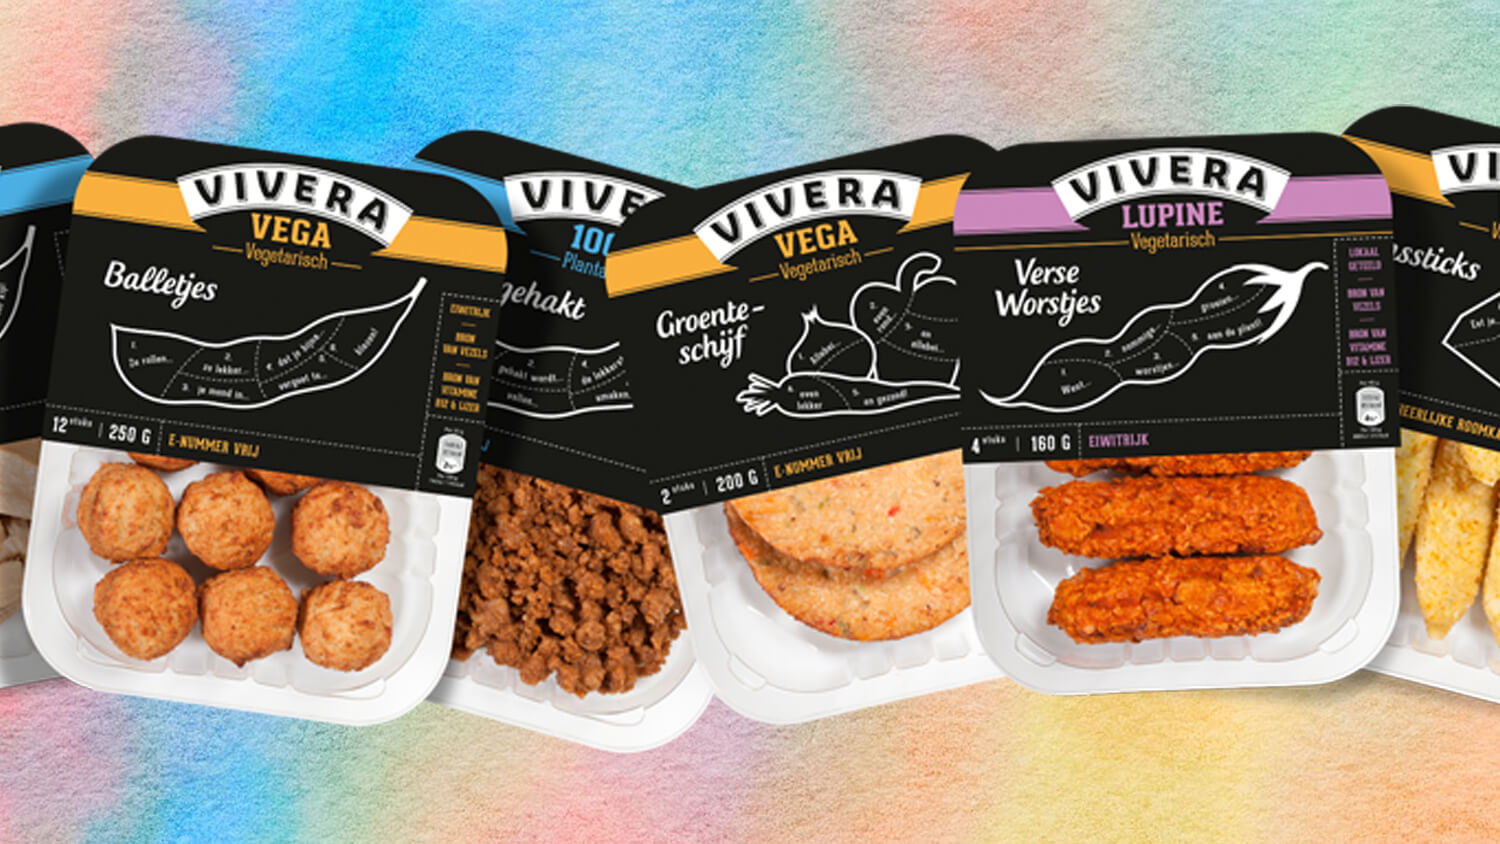 Vegan Product Launches in the UK Increased 200 in 2018